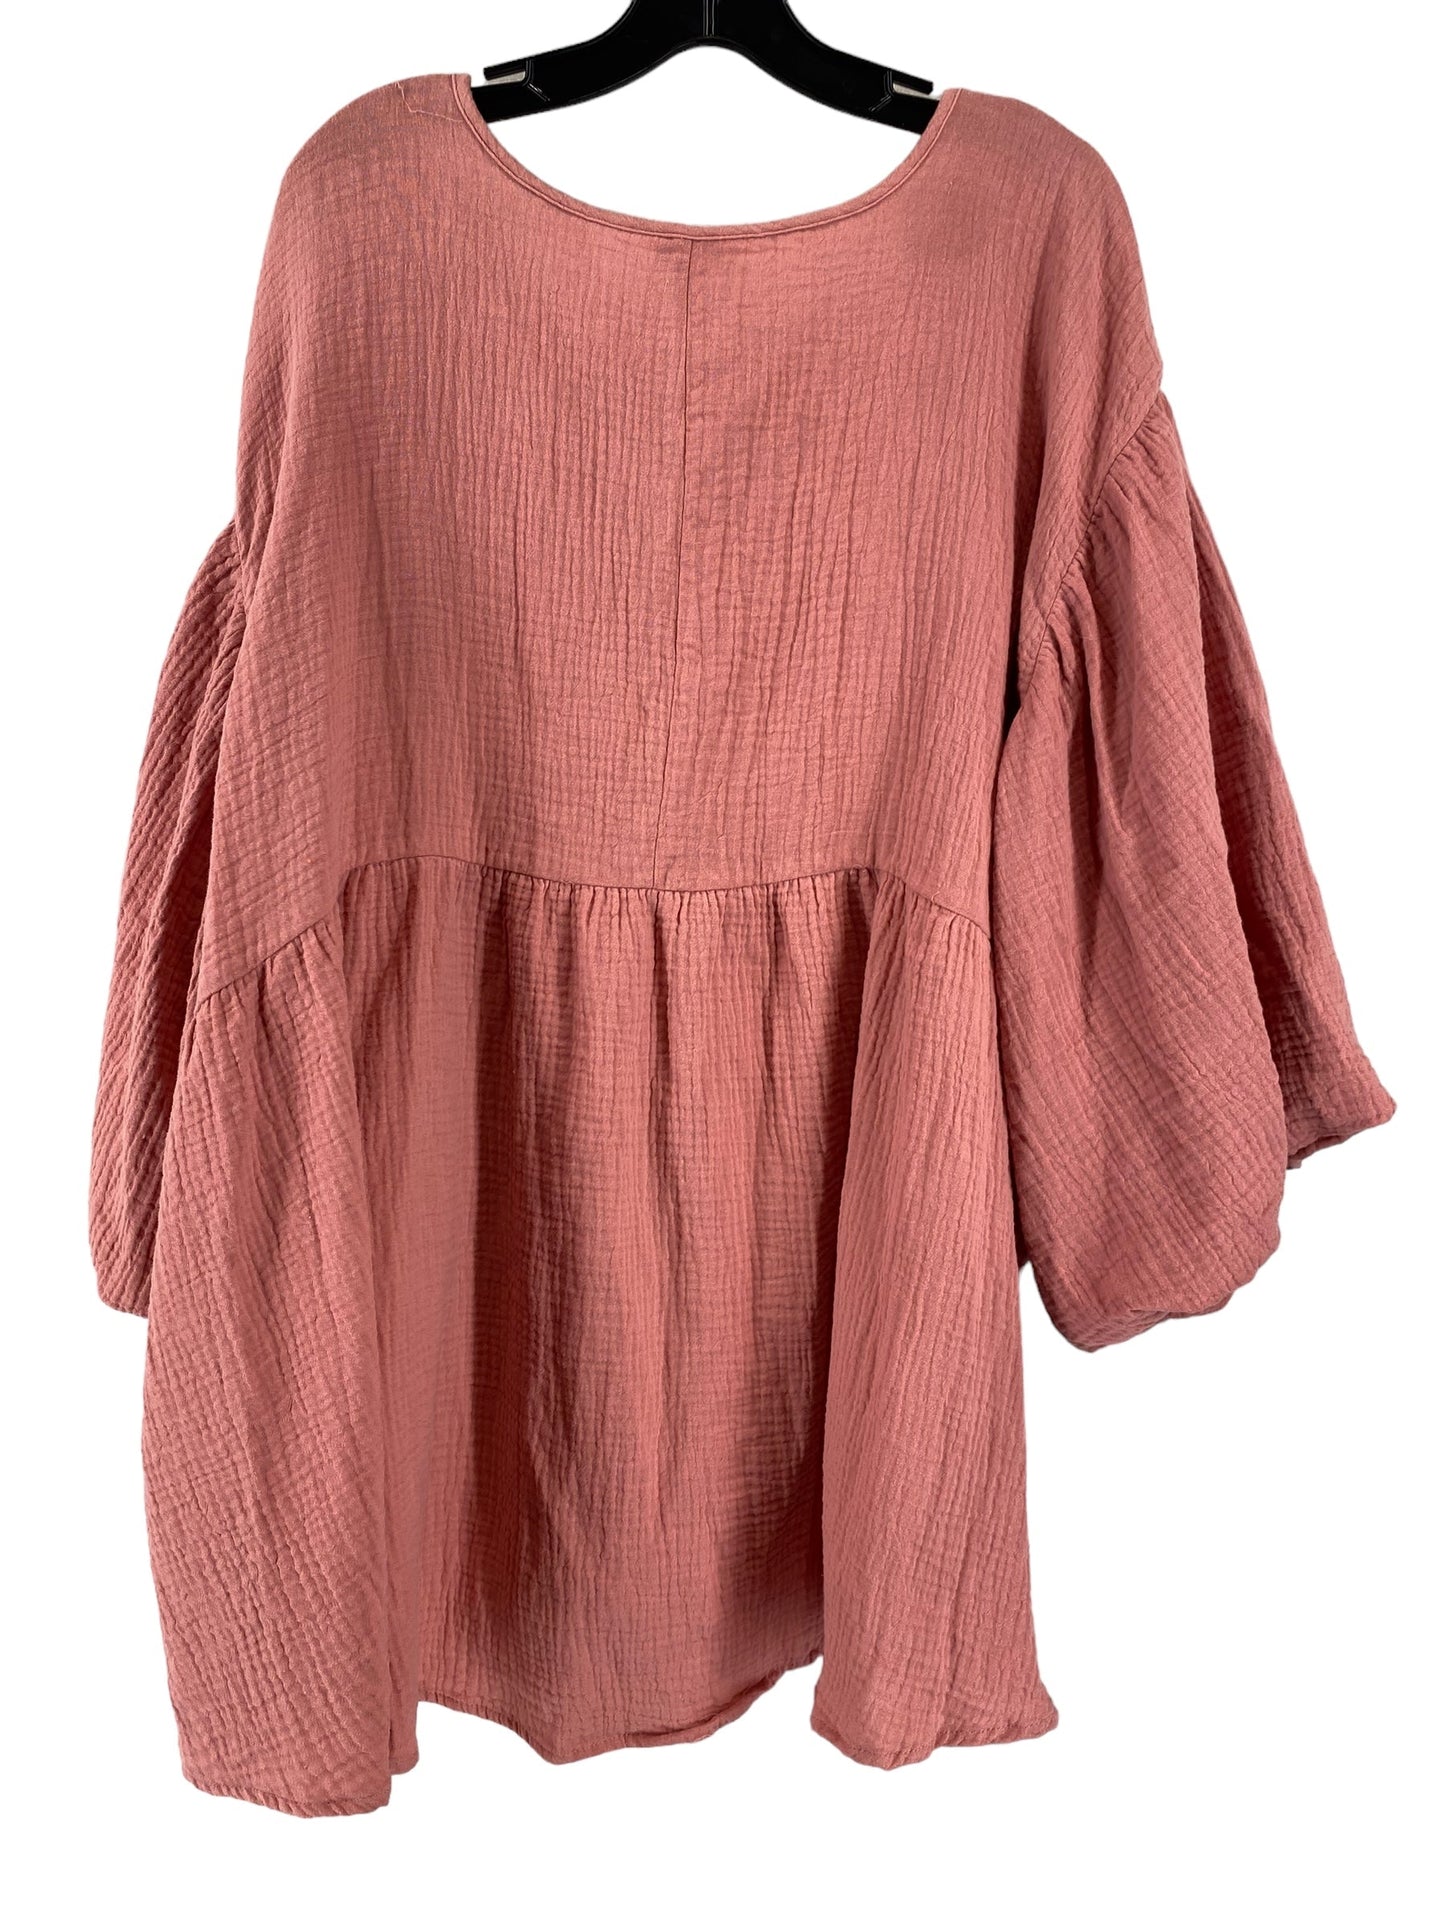 Pink Top 3/4 Sleeve Cato, Size 22